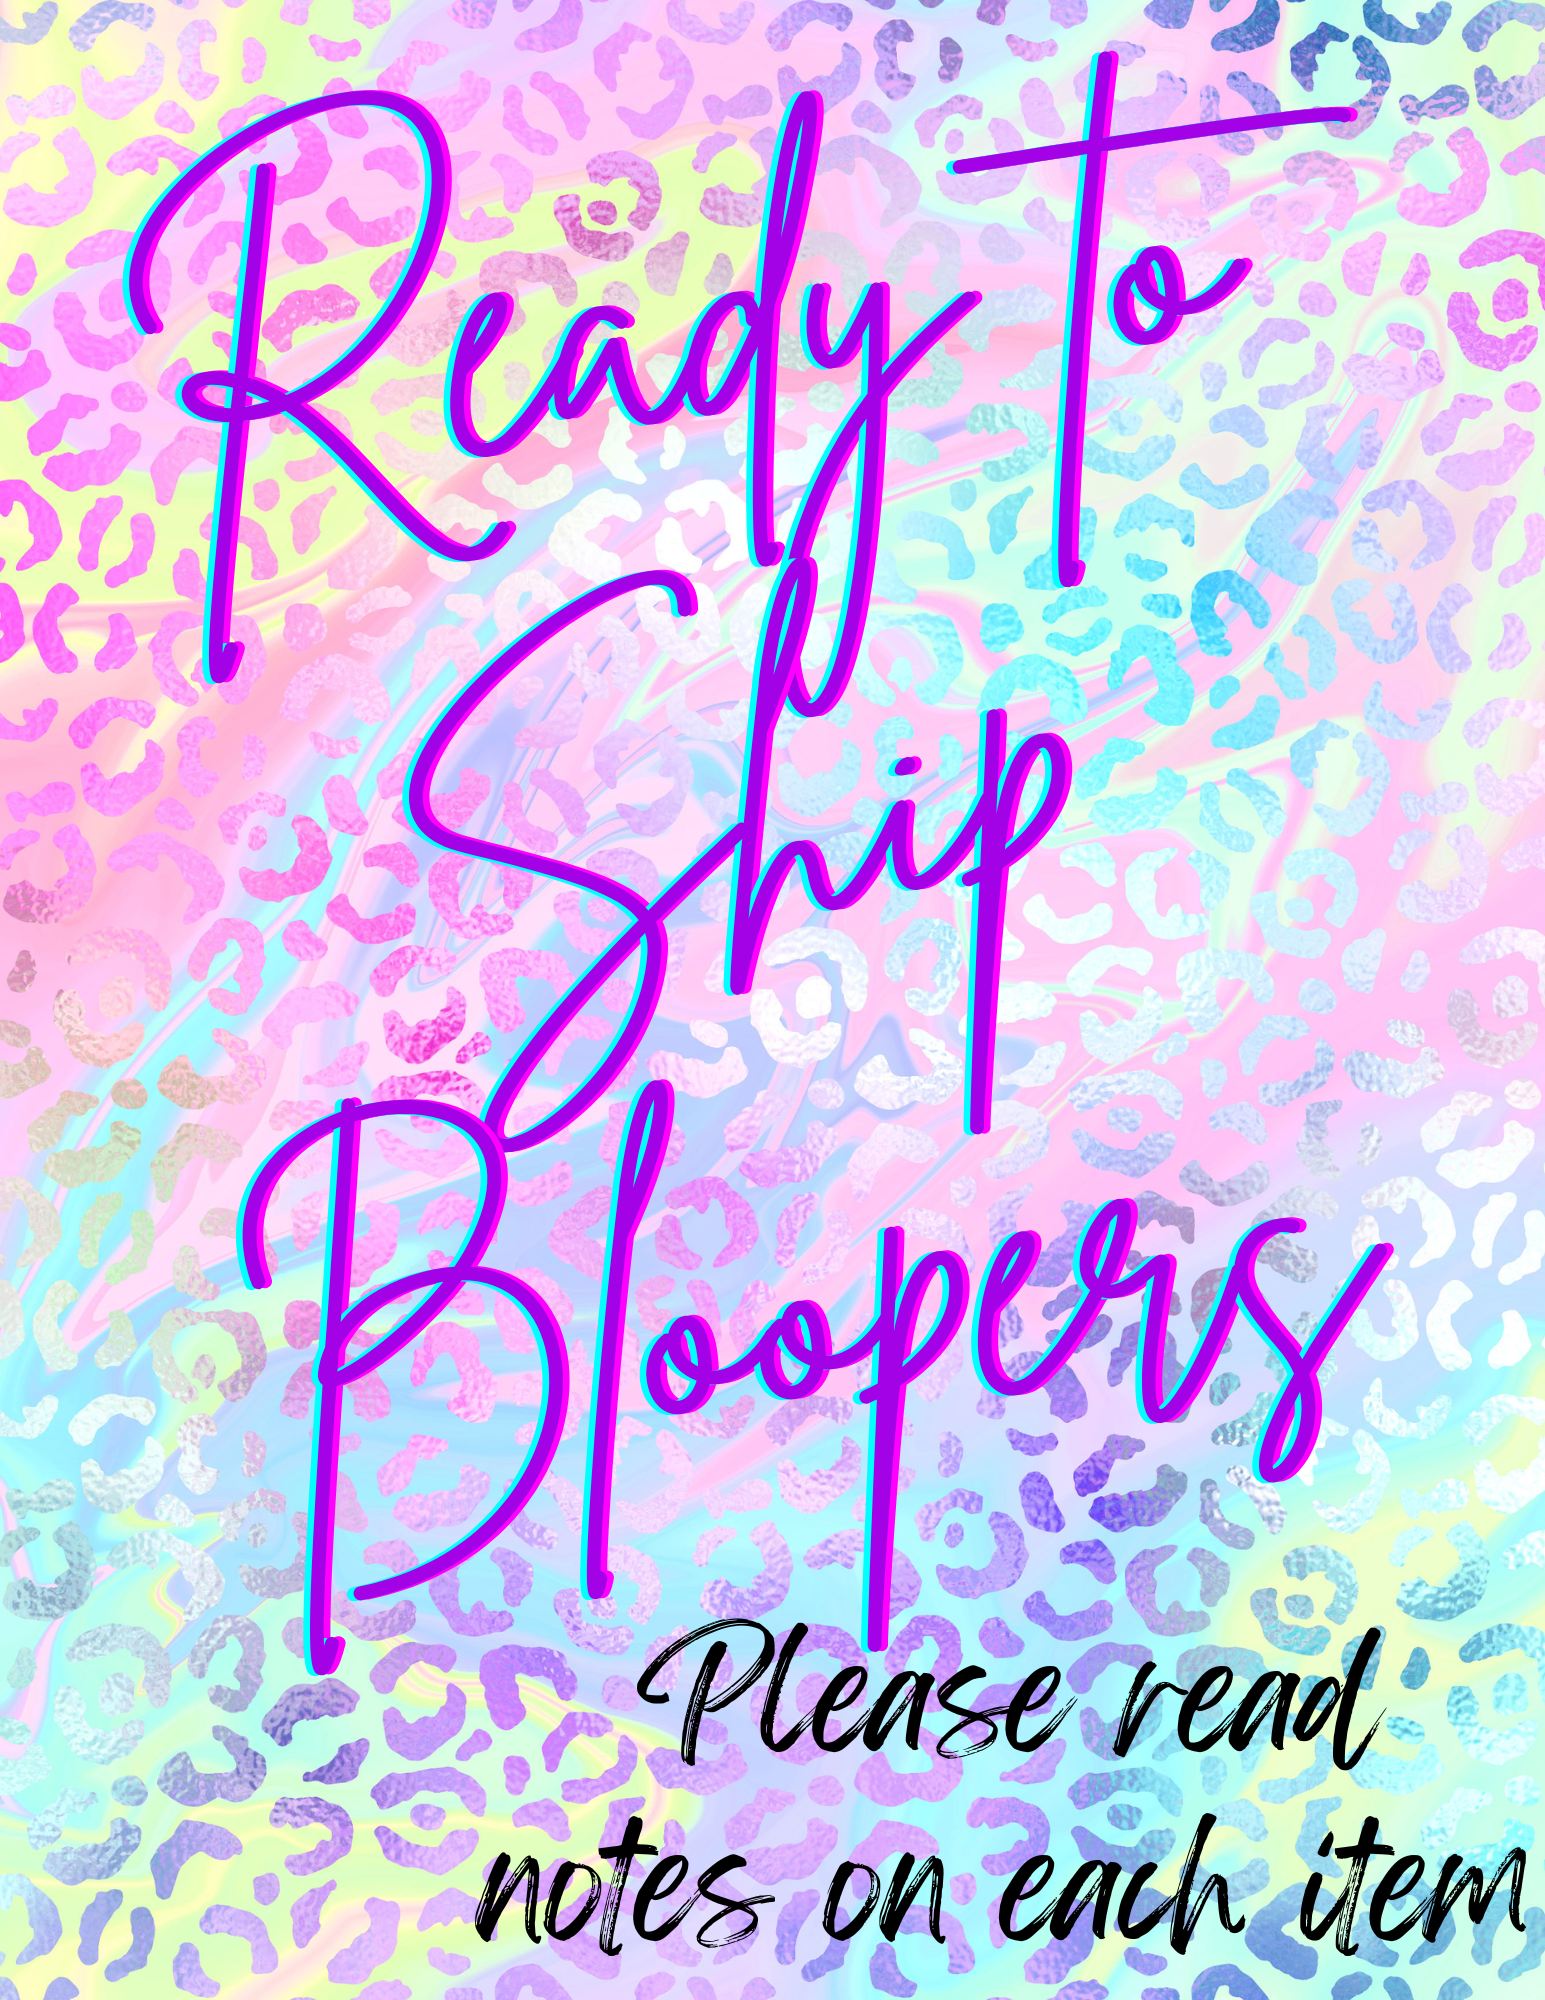 Ready To Ship BLOOPERS (Please read each item)